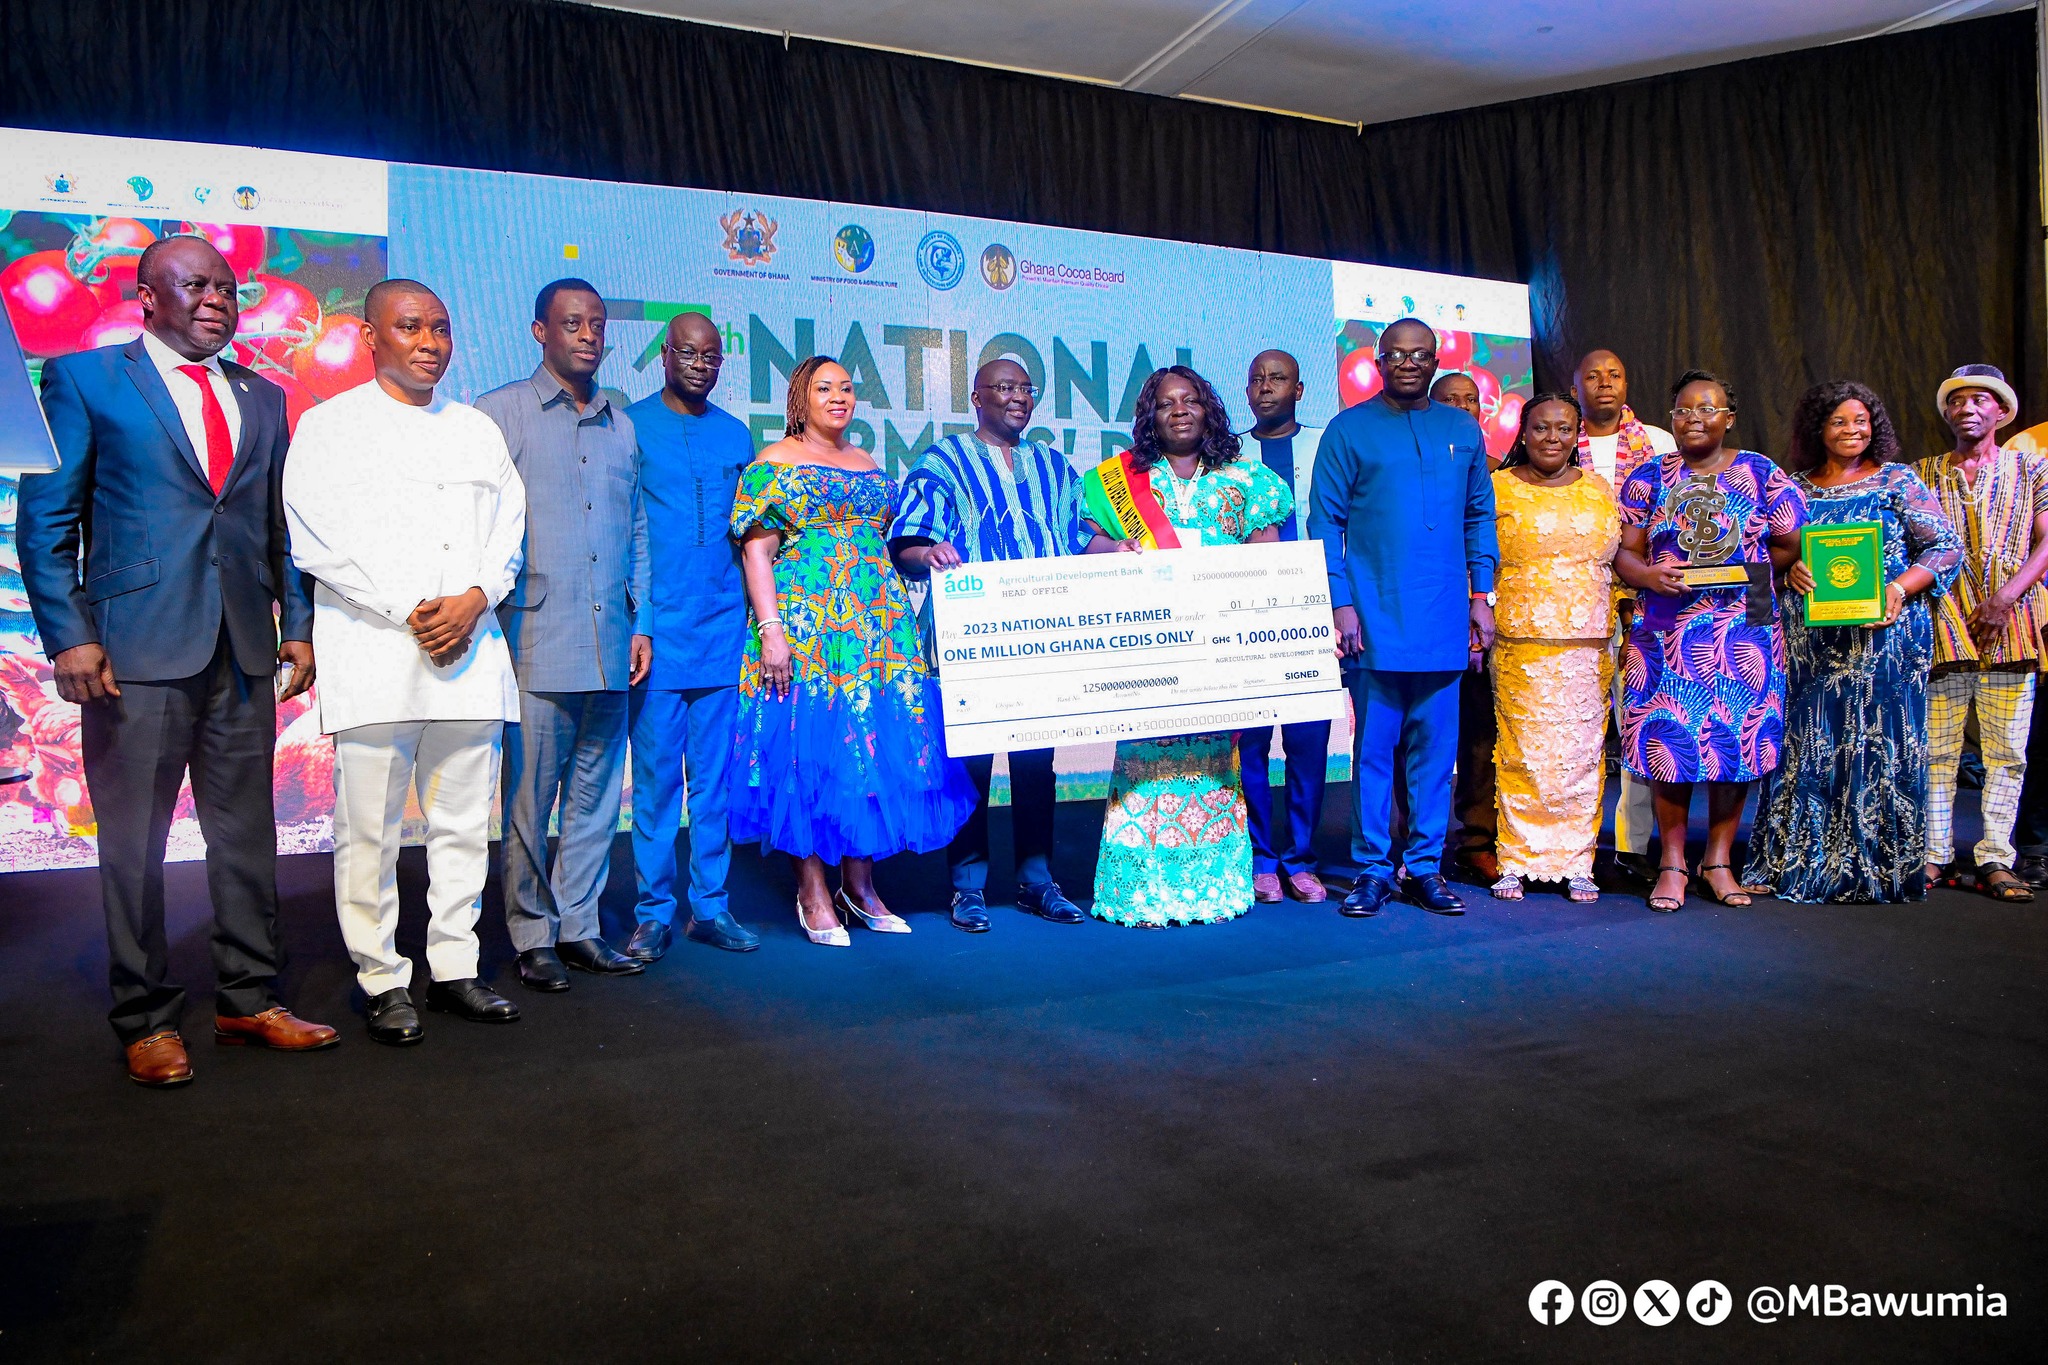 Photos of Charity Akortia, Bawumia, and others.